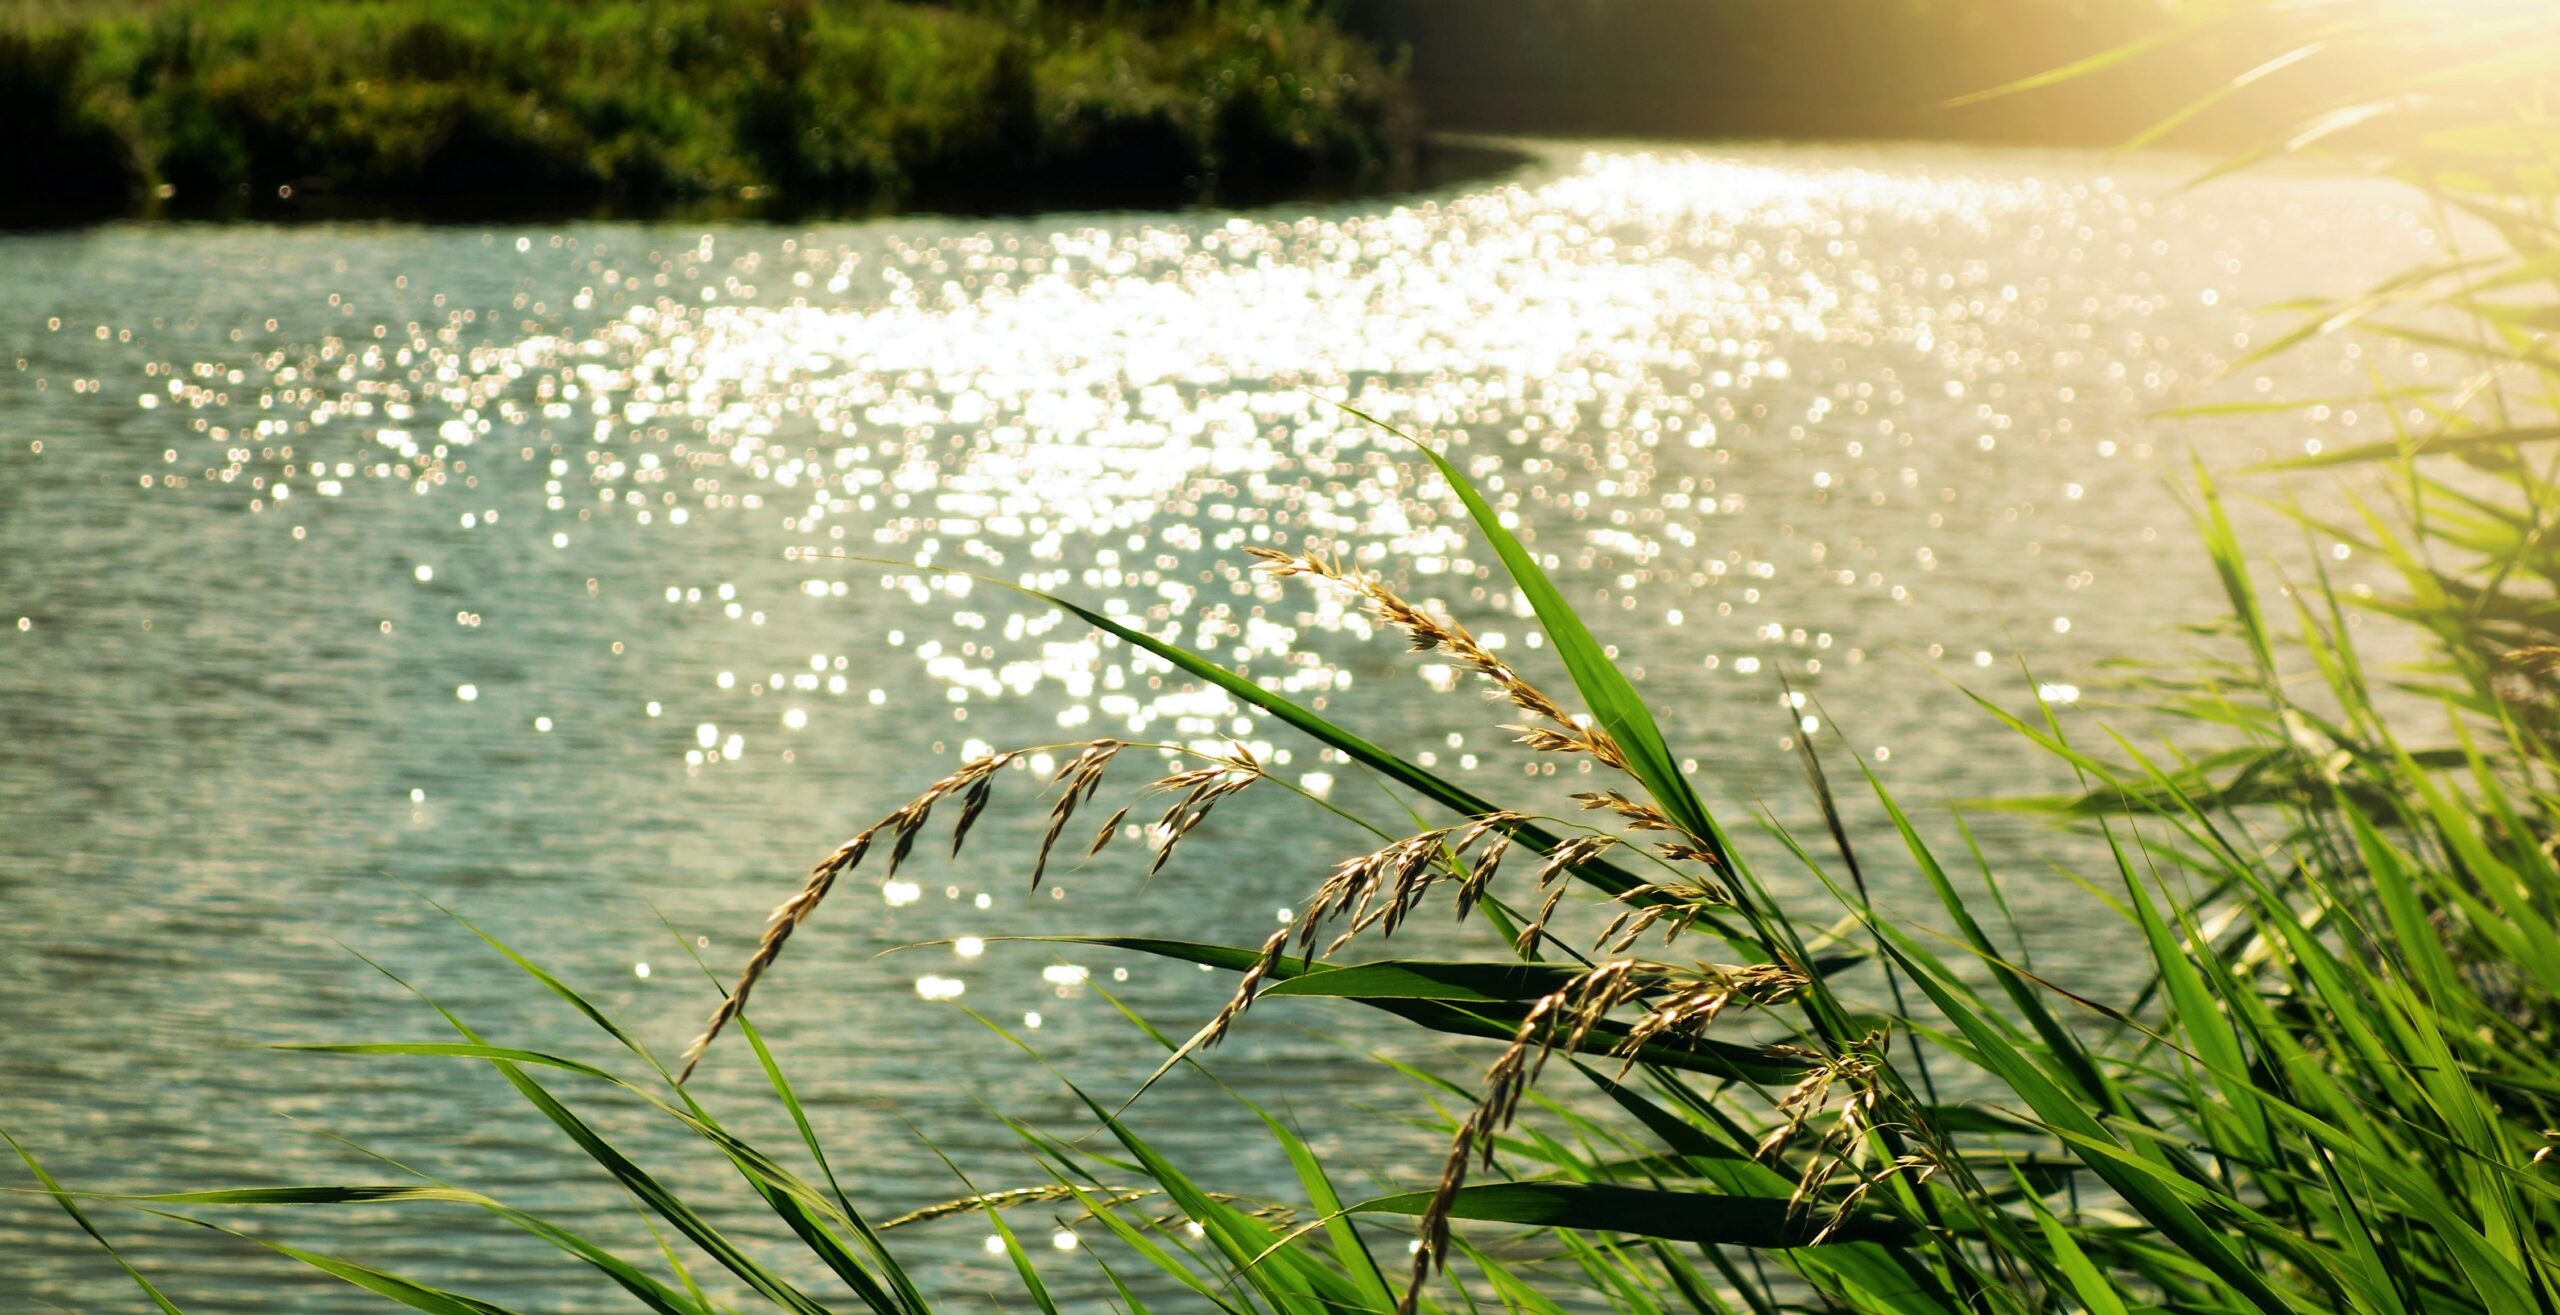 View of green grasses with bright sunny water in the background.